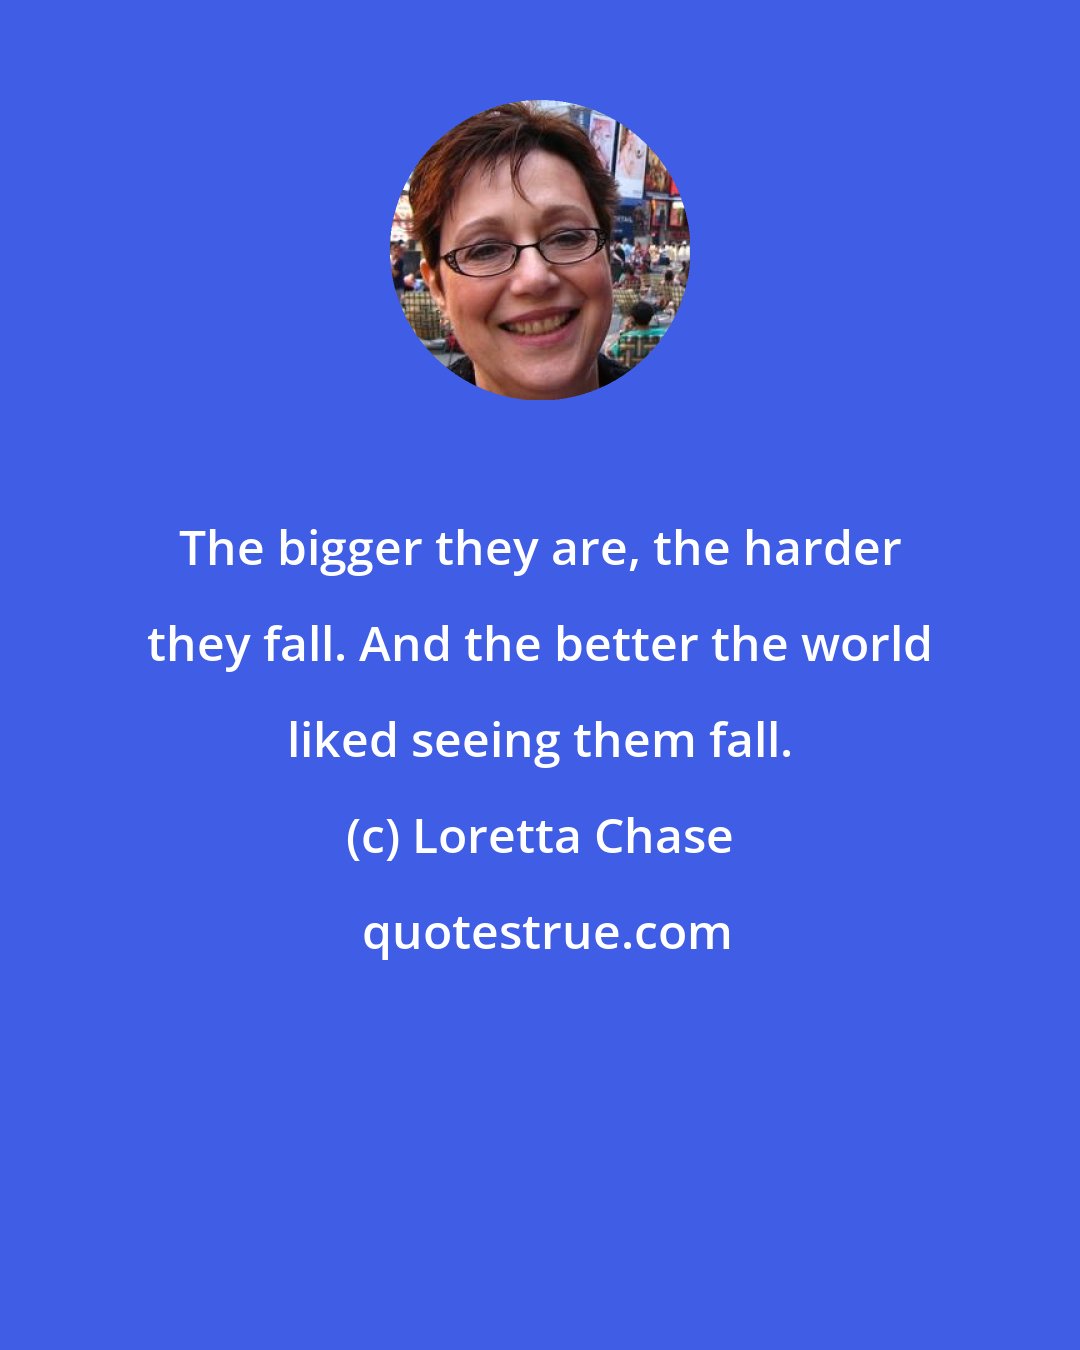 Loretta Chase: The bigger they are, the harder they fall. And the better the world liked seeing them fall.